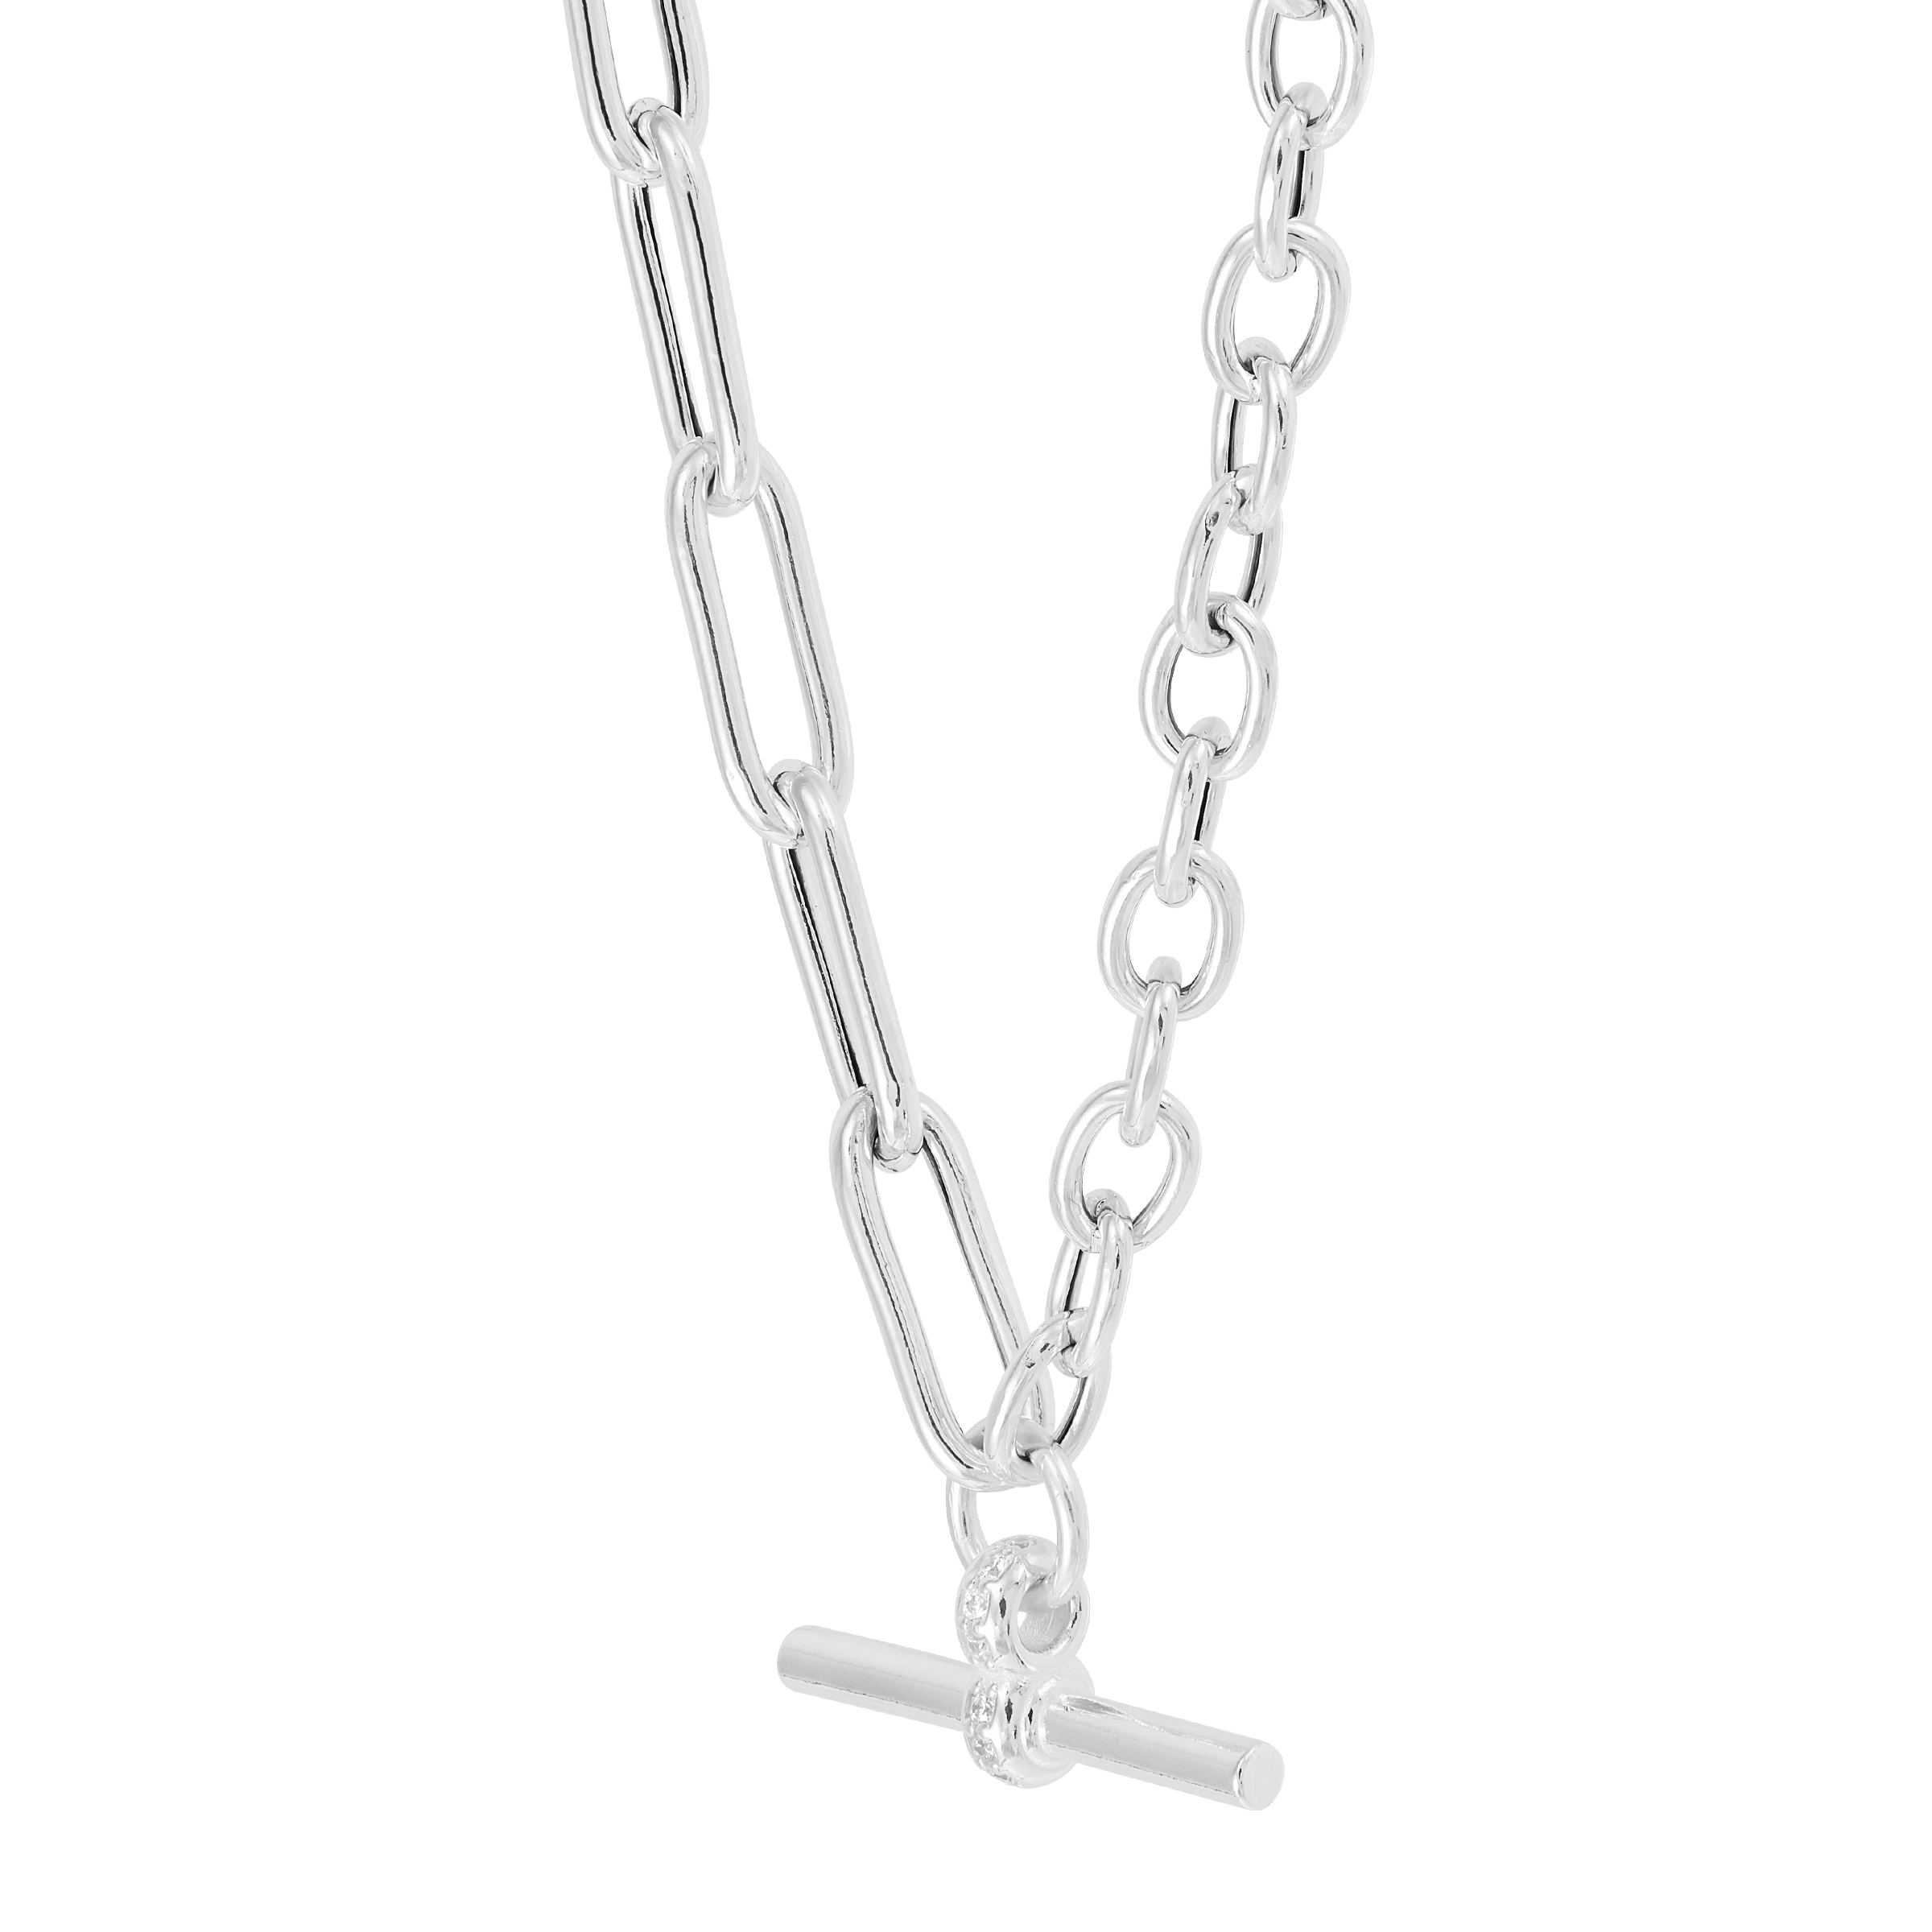 Sterling Silver Engraveable Heart Toggle Link Charm Necklace - Walmart.com